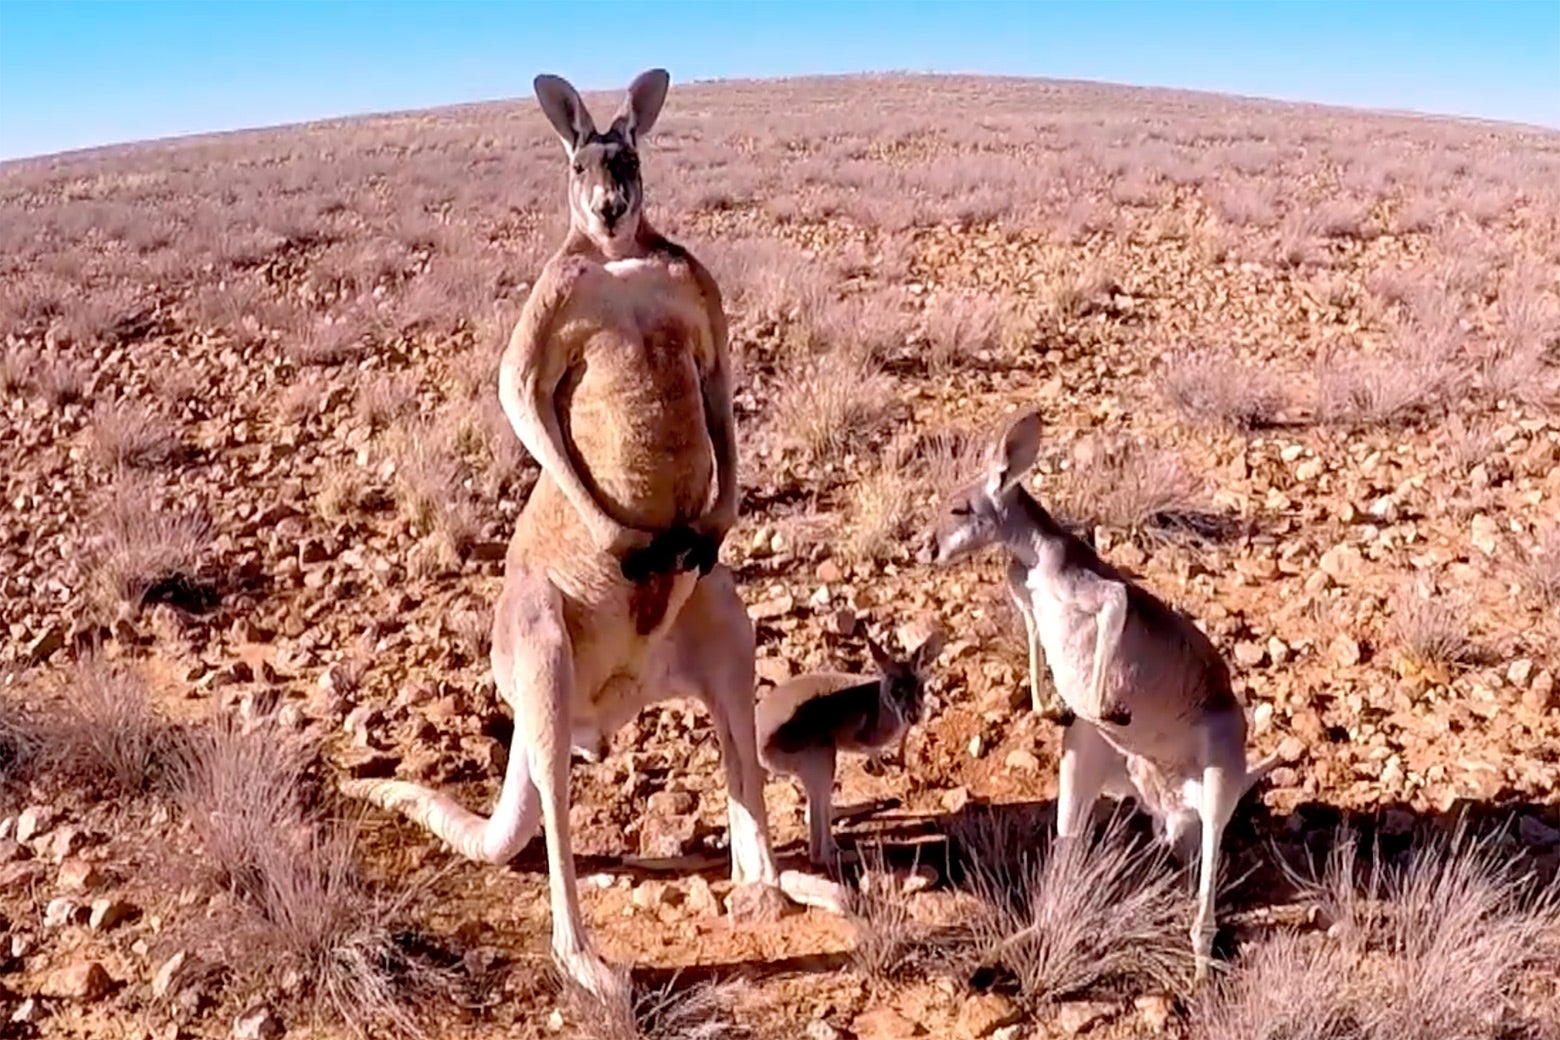 The documentary Kangaroo A Love-Hate Story examines Australians'  relationship with their national icon.